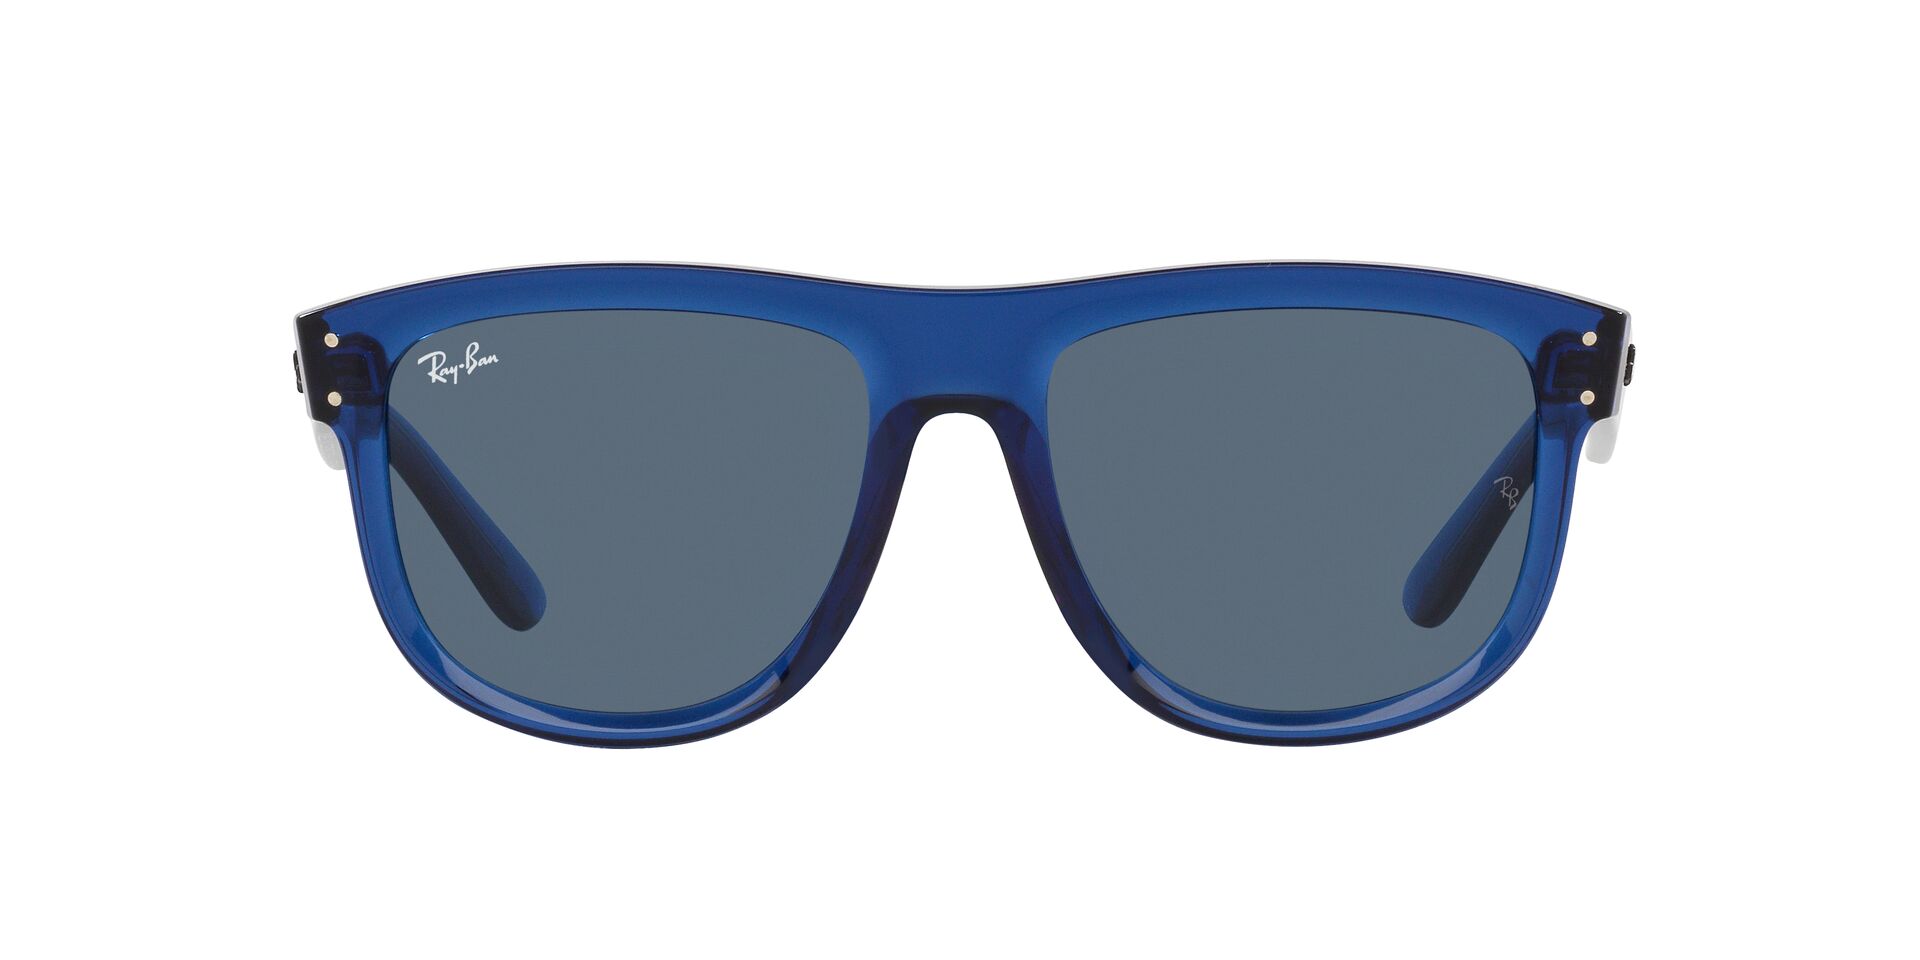 Buy Ray Ban Sunglasses online from Bhagya Opticals